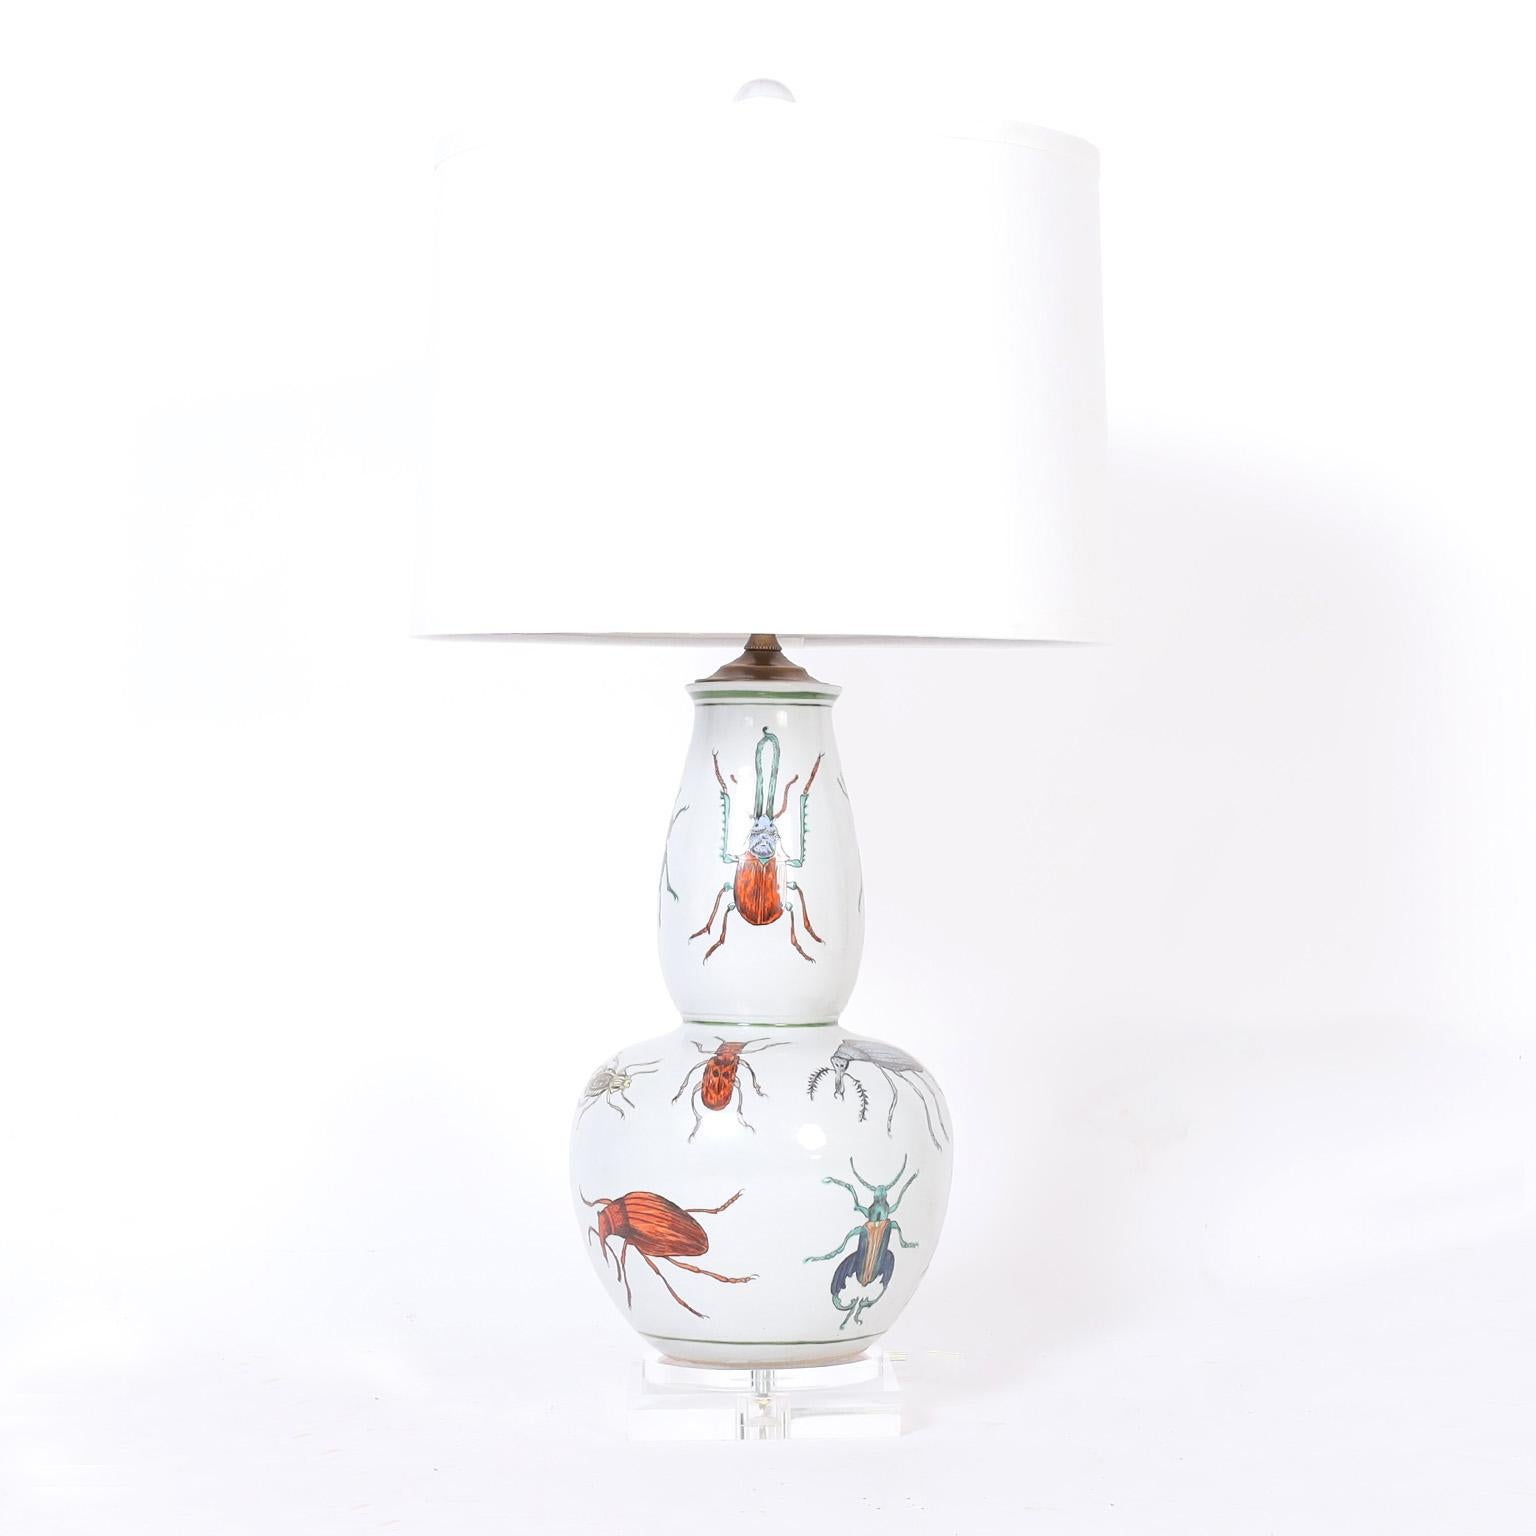 Pair of Chinese porcelain table lamps with classic form hand decorated with an assortment of colorful bugs or insects, presented on lucite double plinth bases.